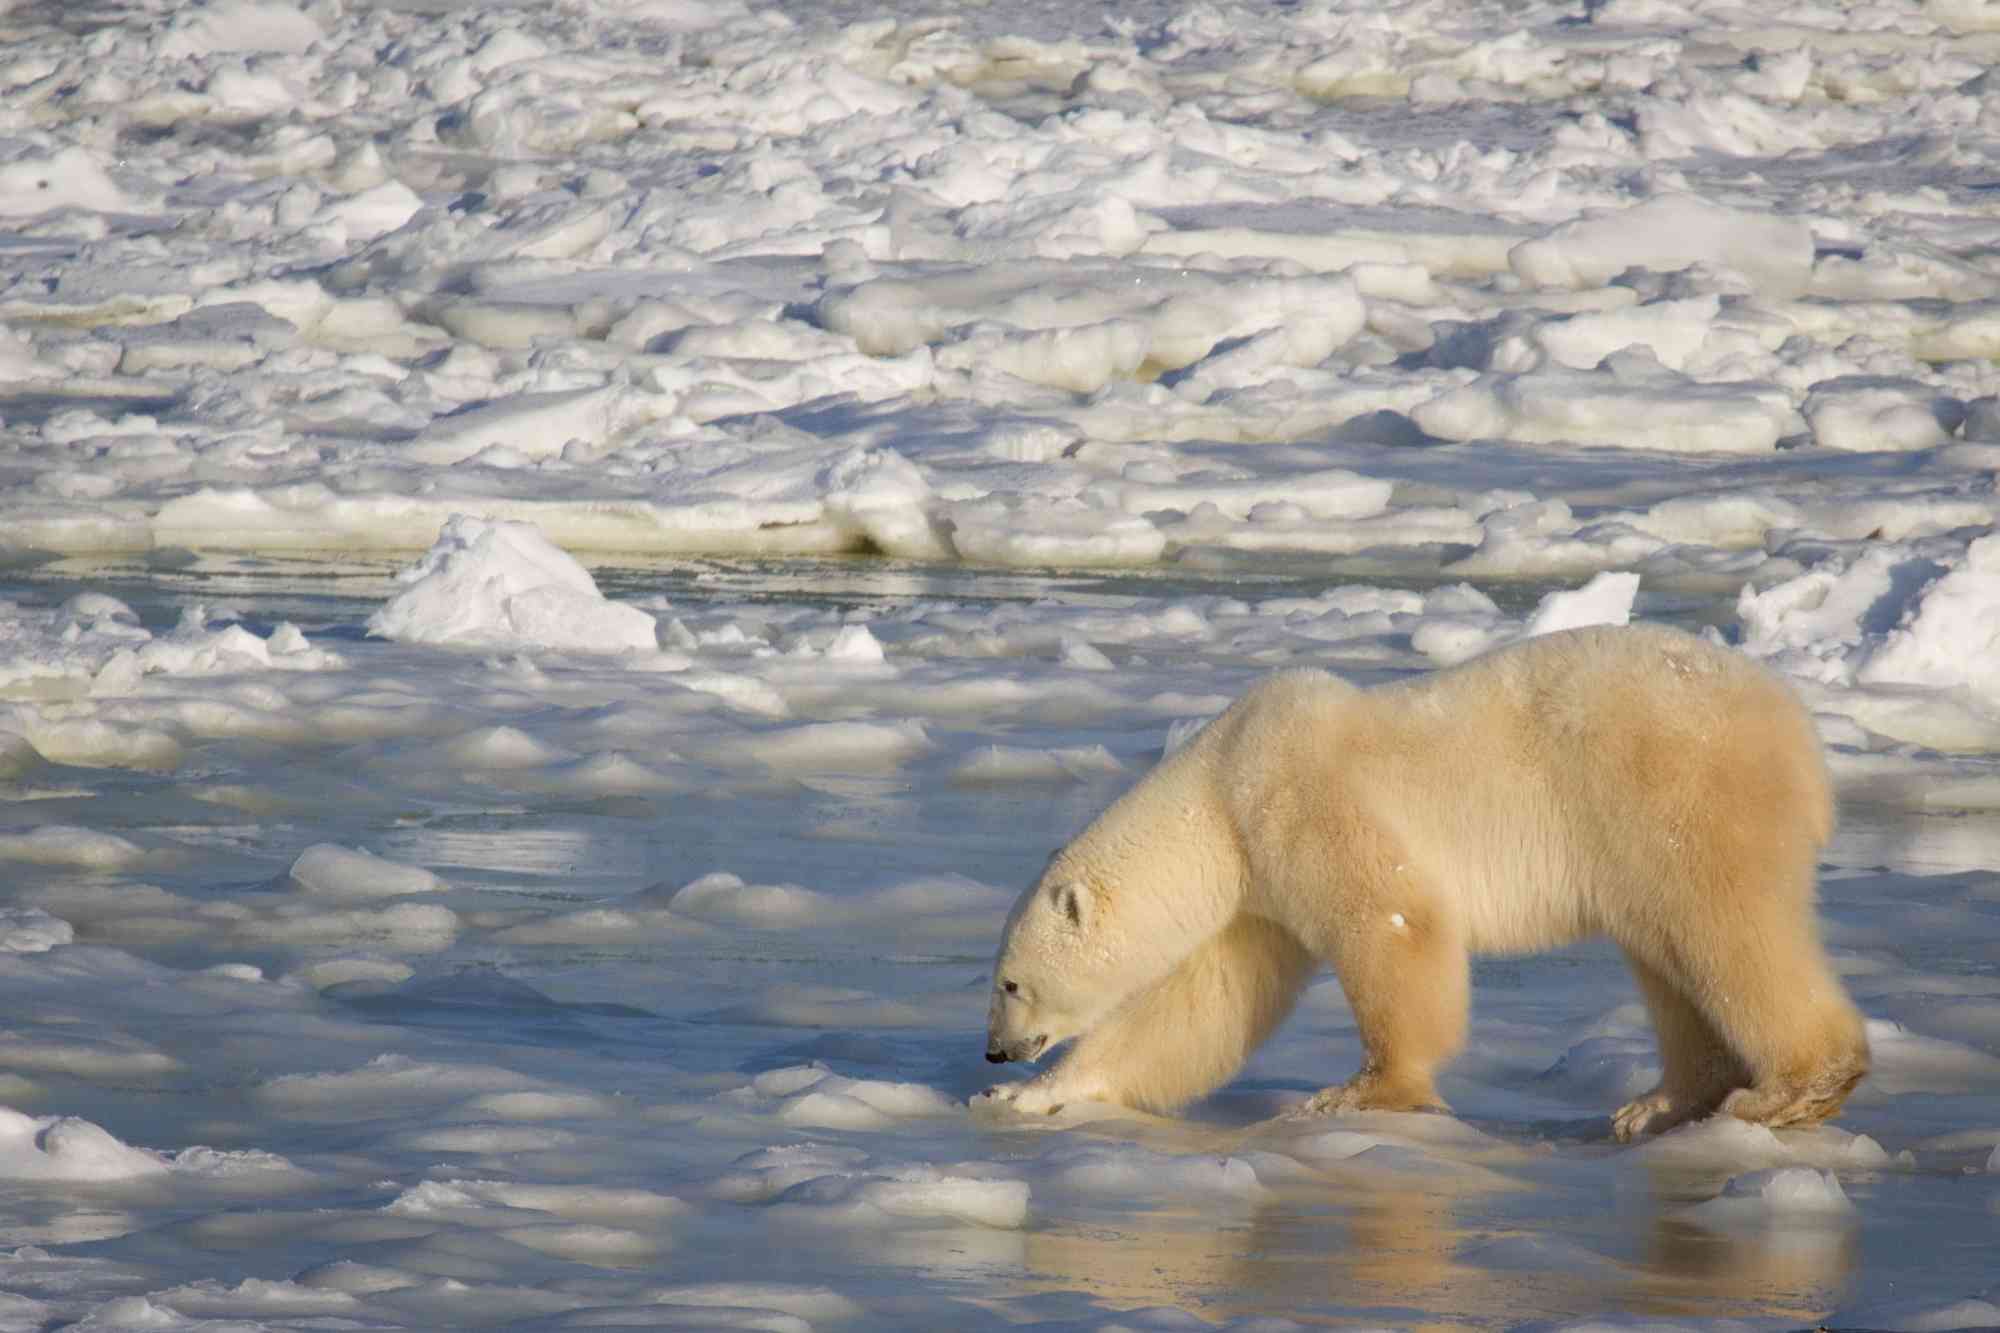 Polar Bears Affected by Climate Change | Defenders of Wildlife